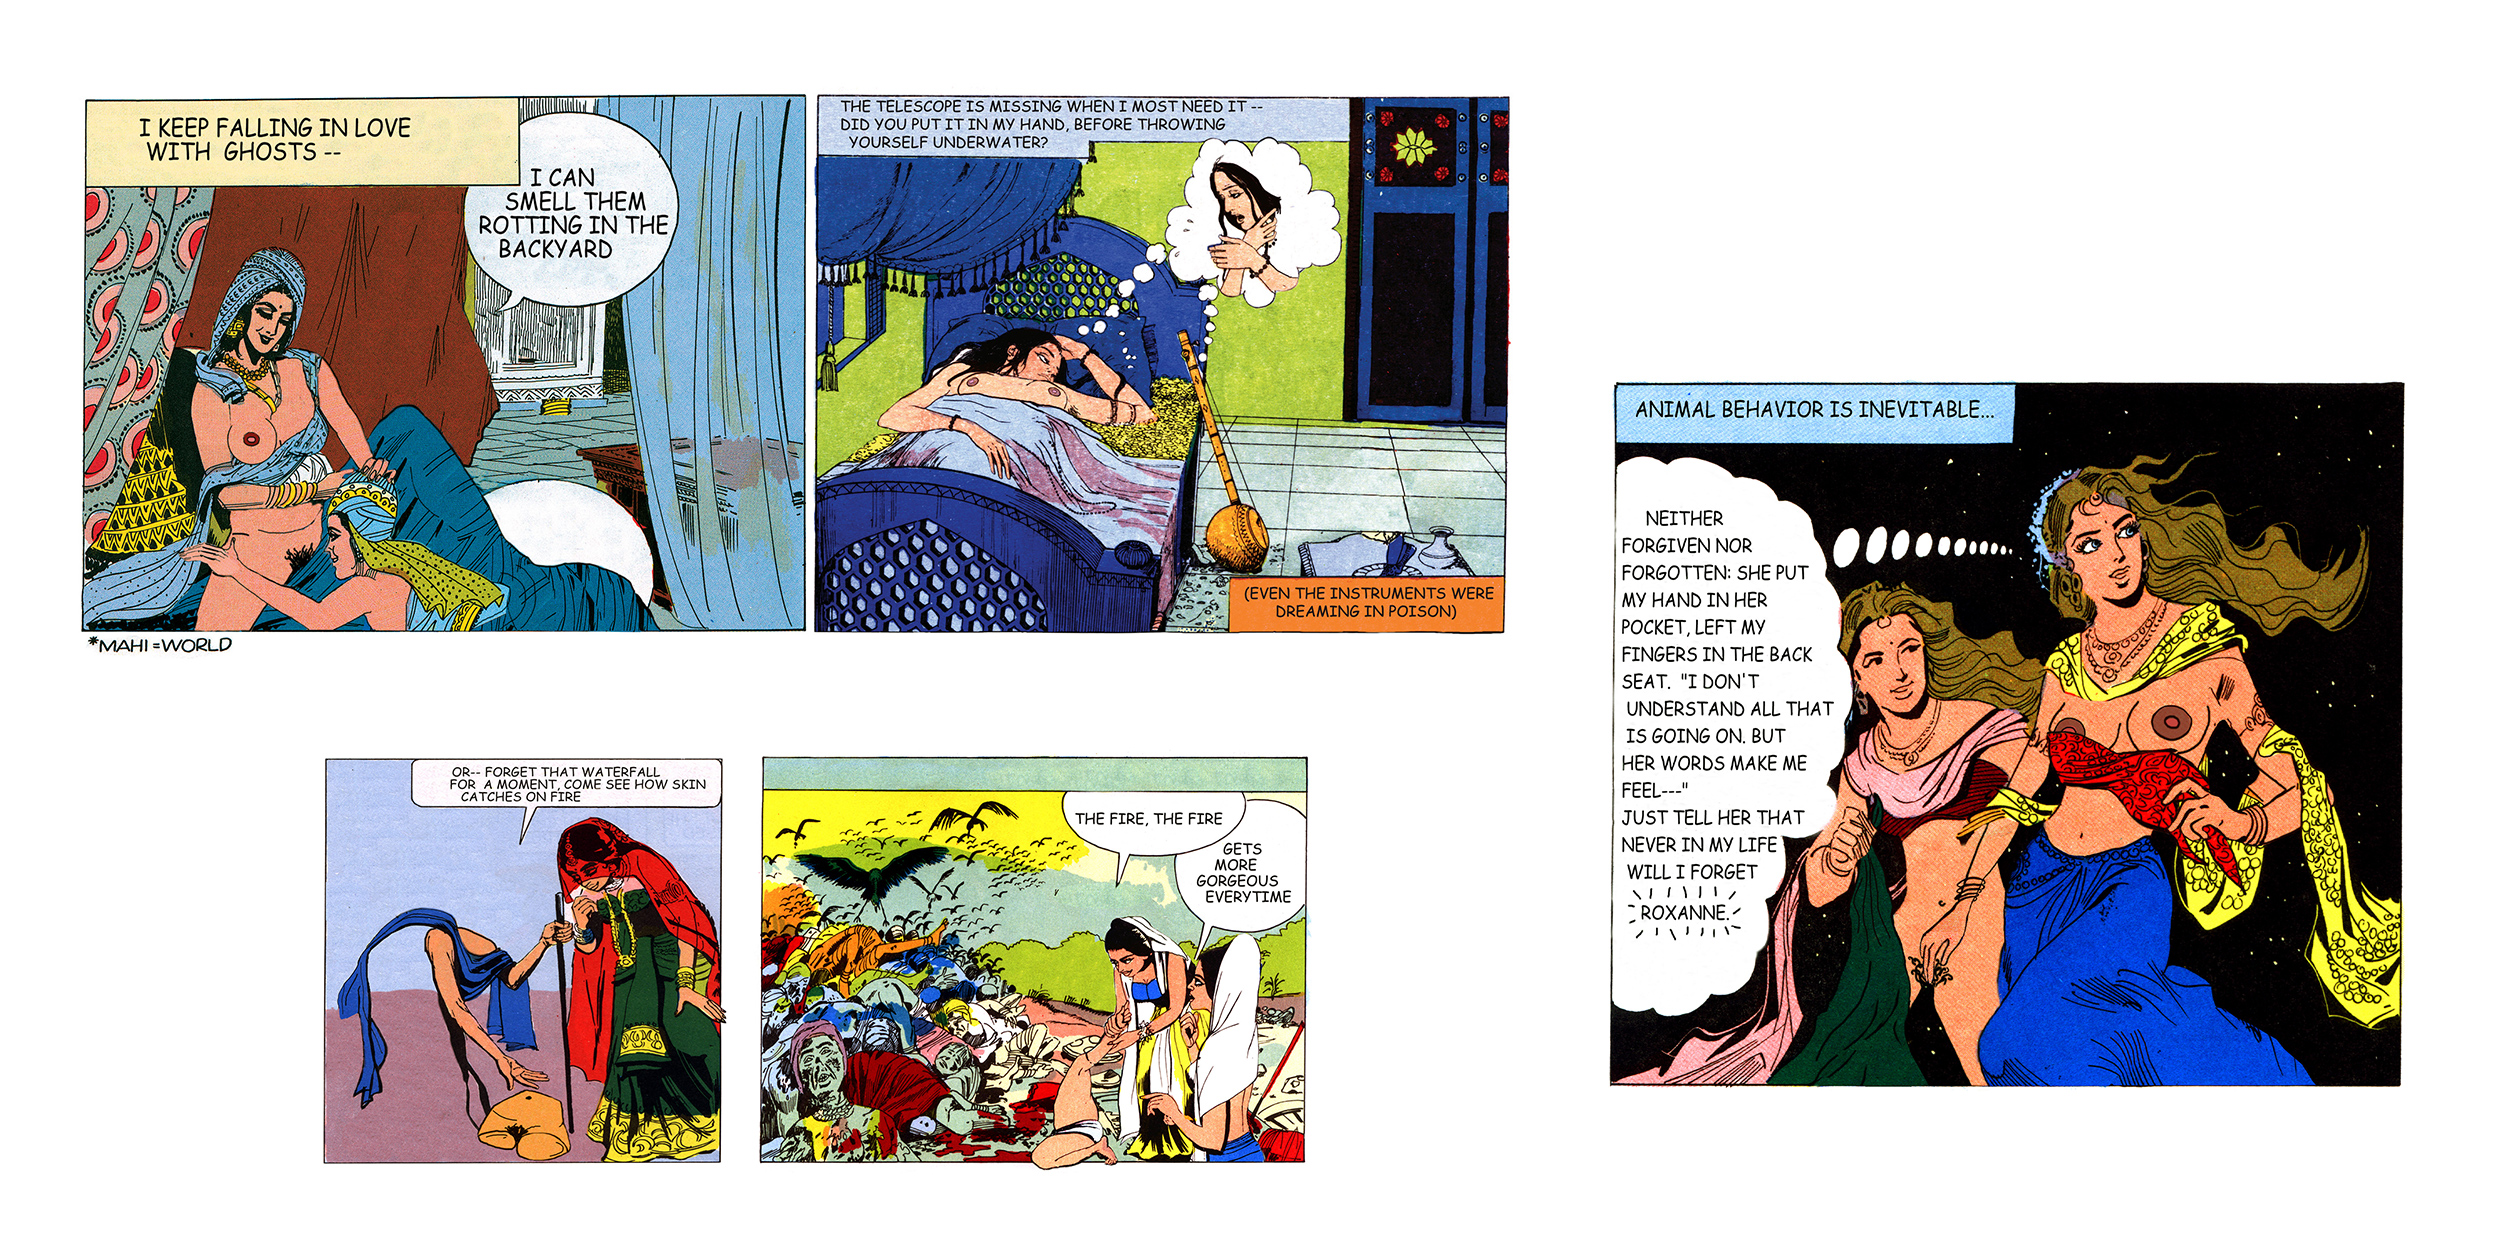 Editions from Tales of Amnesia - <i>Triptych I (Ghosts, telescope - The fire, the fire - Roxanne</i> from <i>Tales of Amnesia</i>), 2002/07. Digital C-prints, edition of 5 (+1 AP).